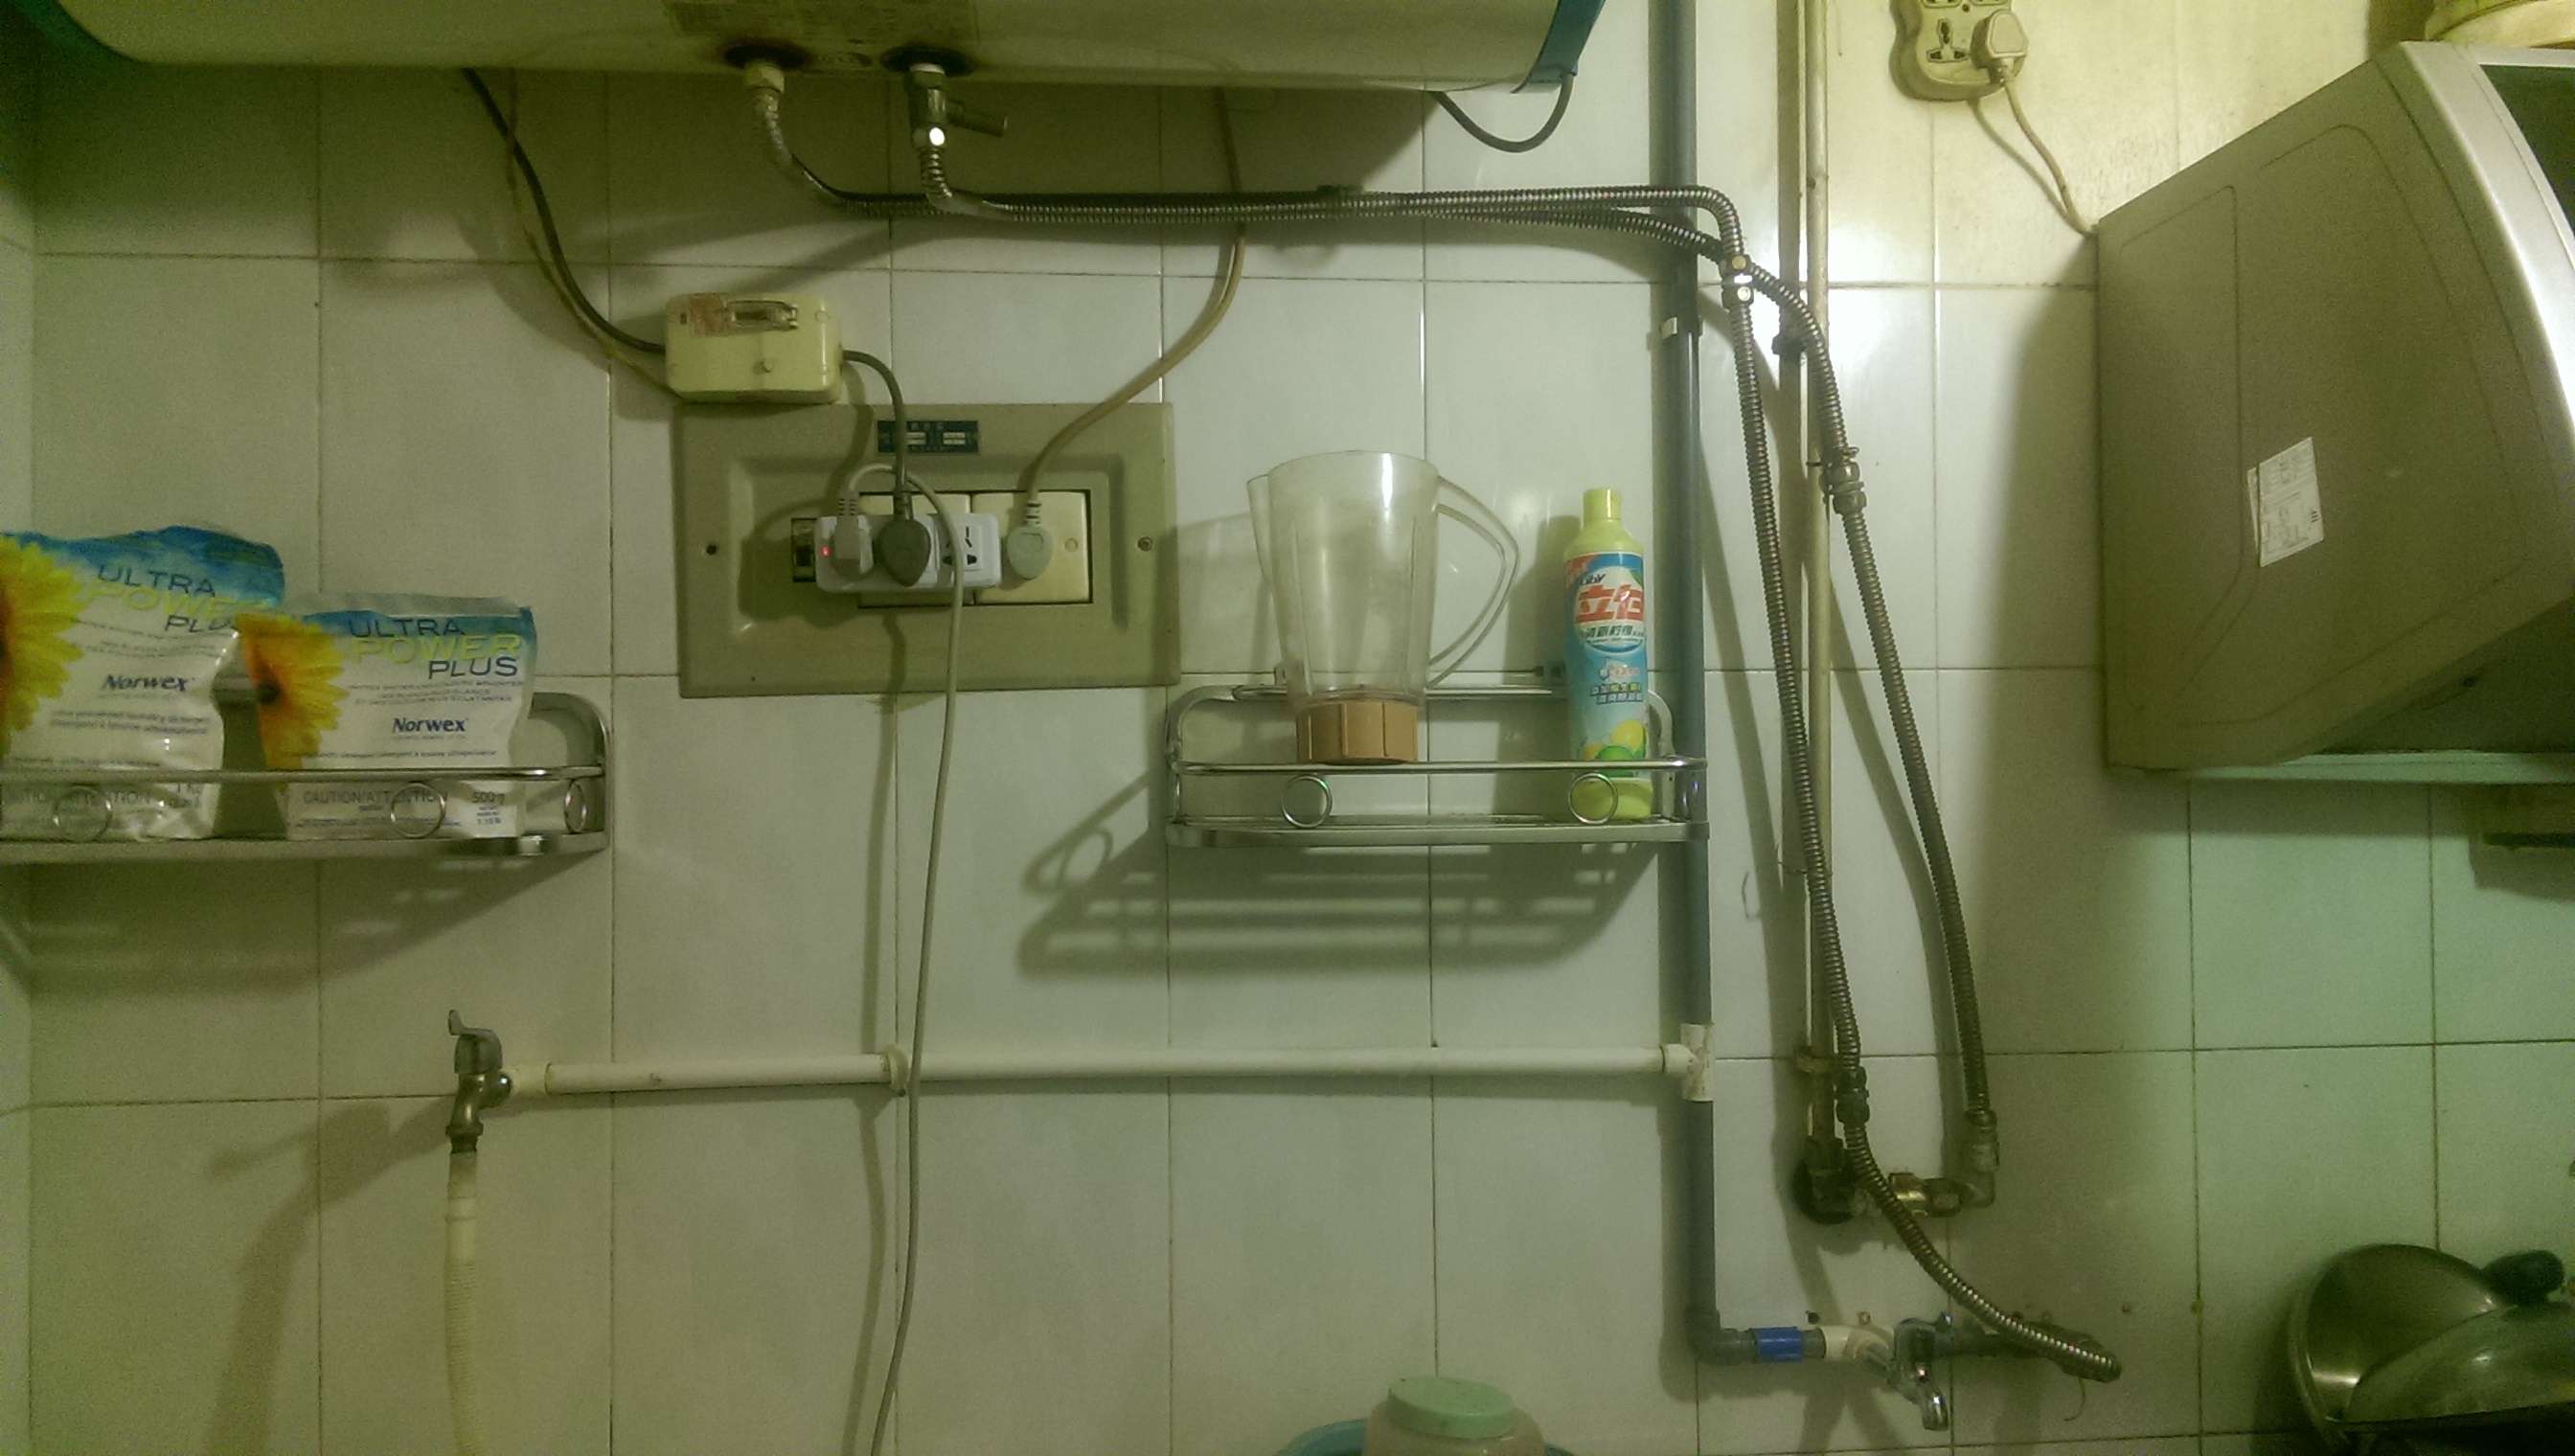 The pipes above our kitchen sink.  They carry the water from the hot water tank to the bathroom.  